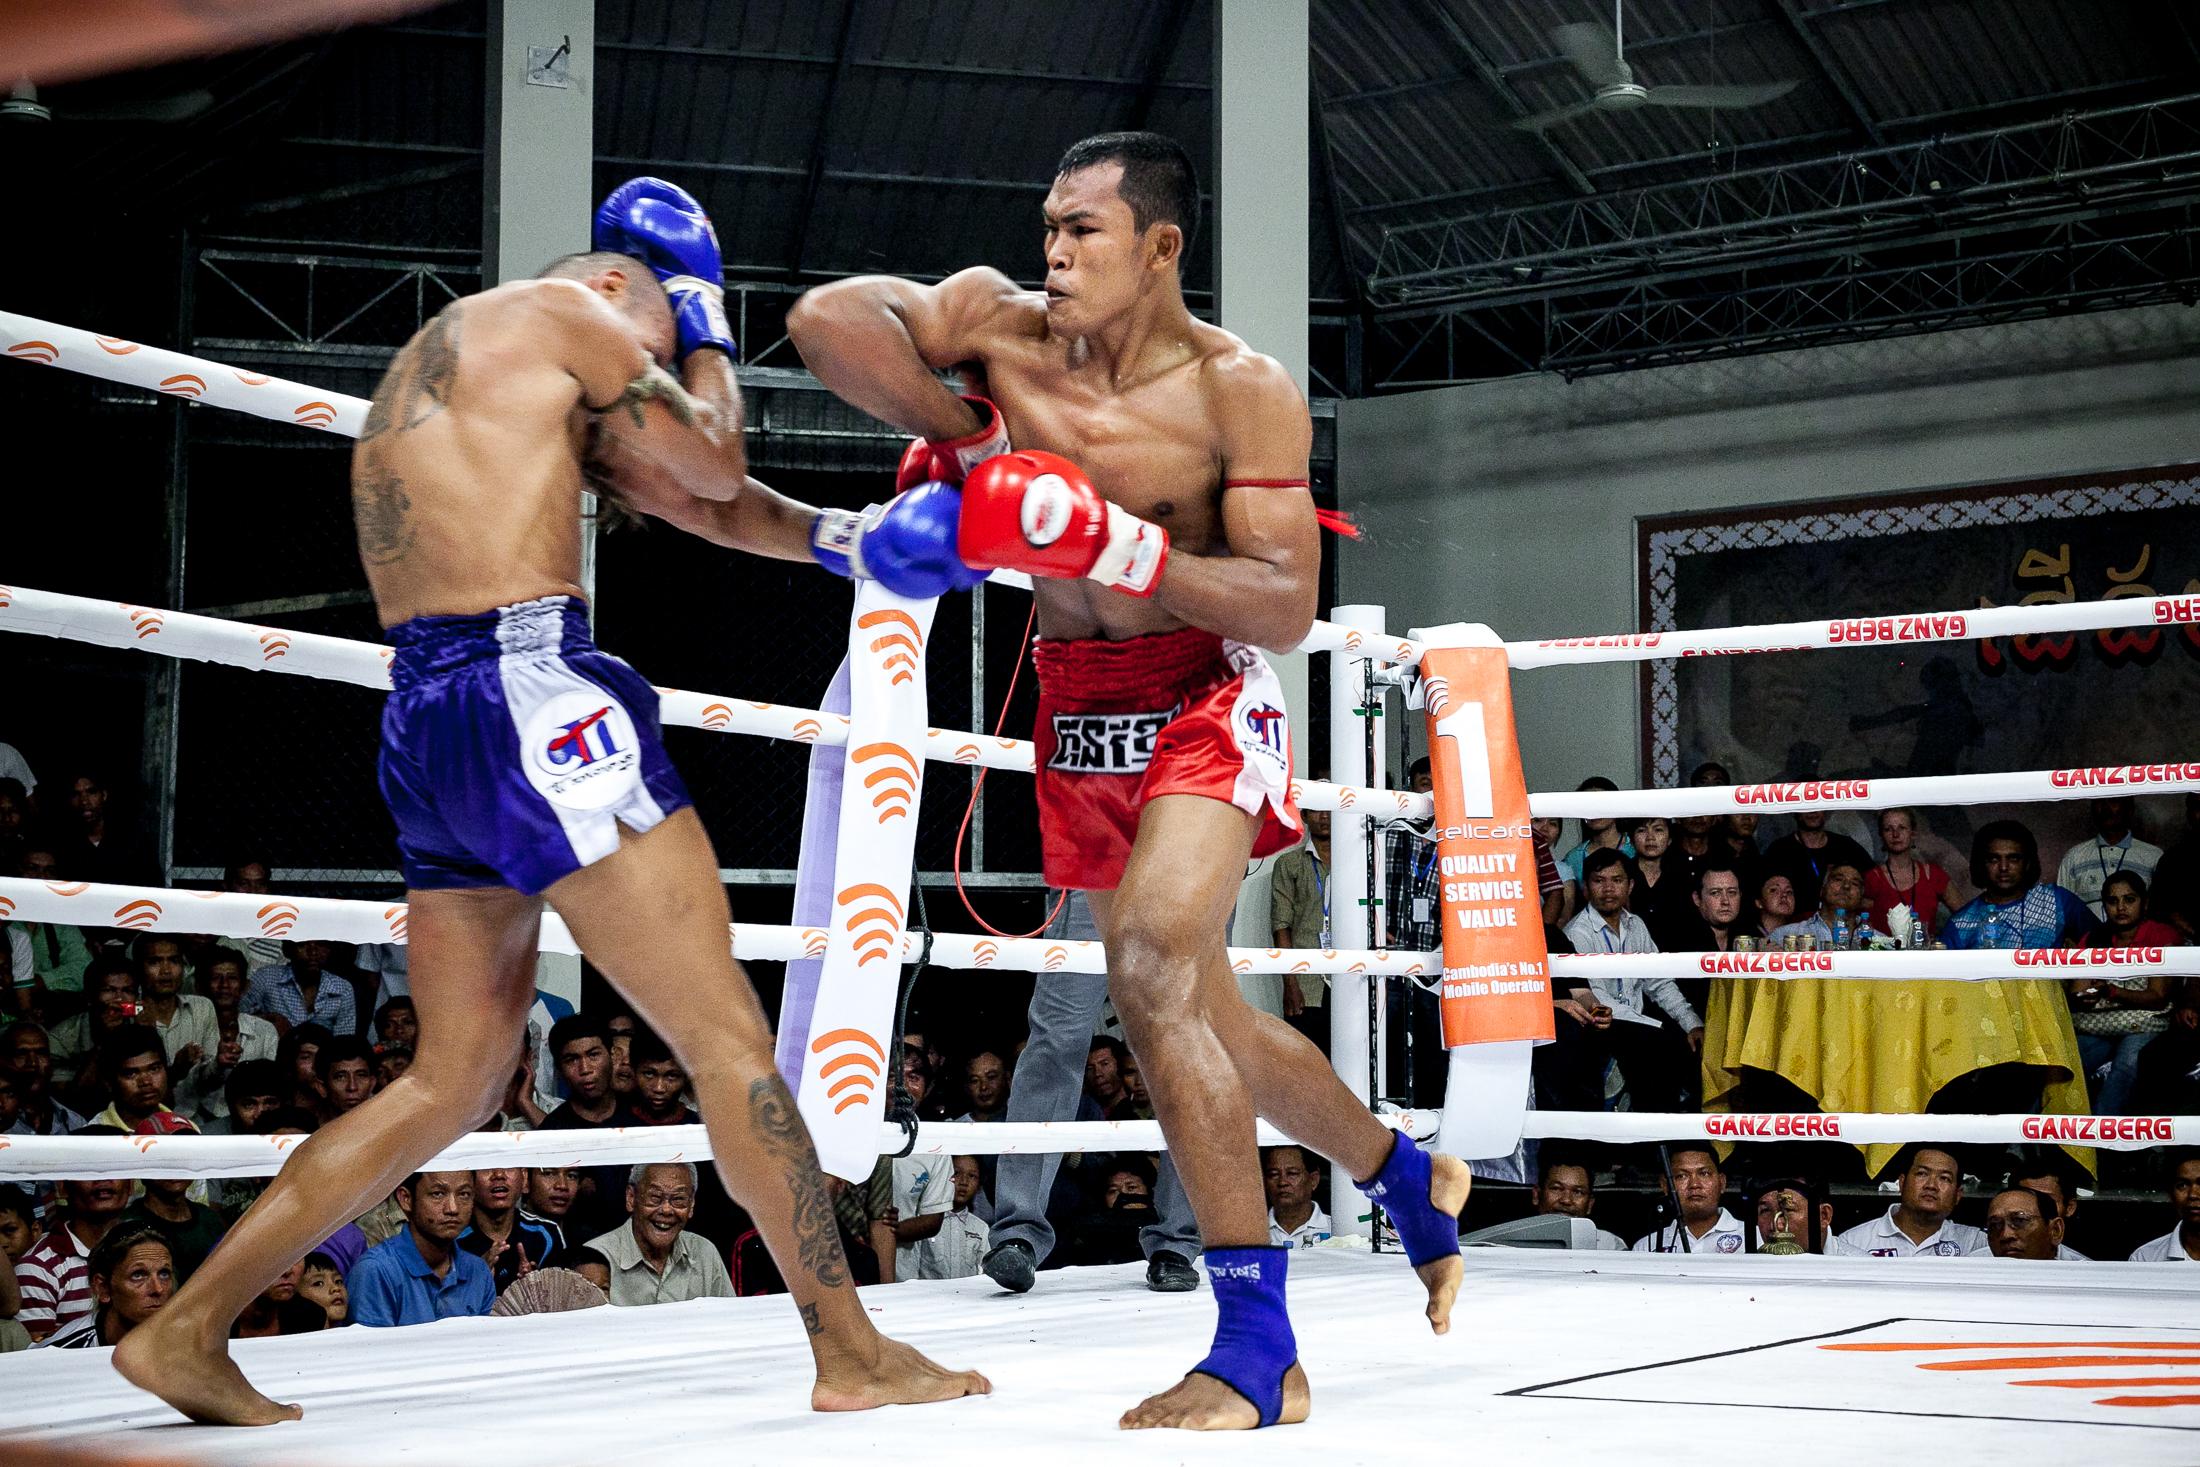 The Khmer Fighters